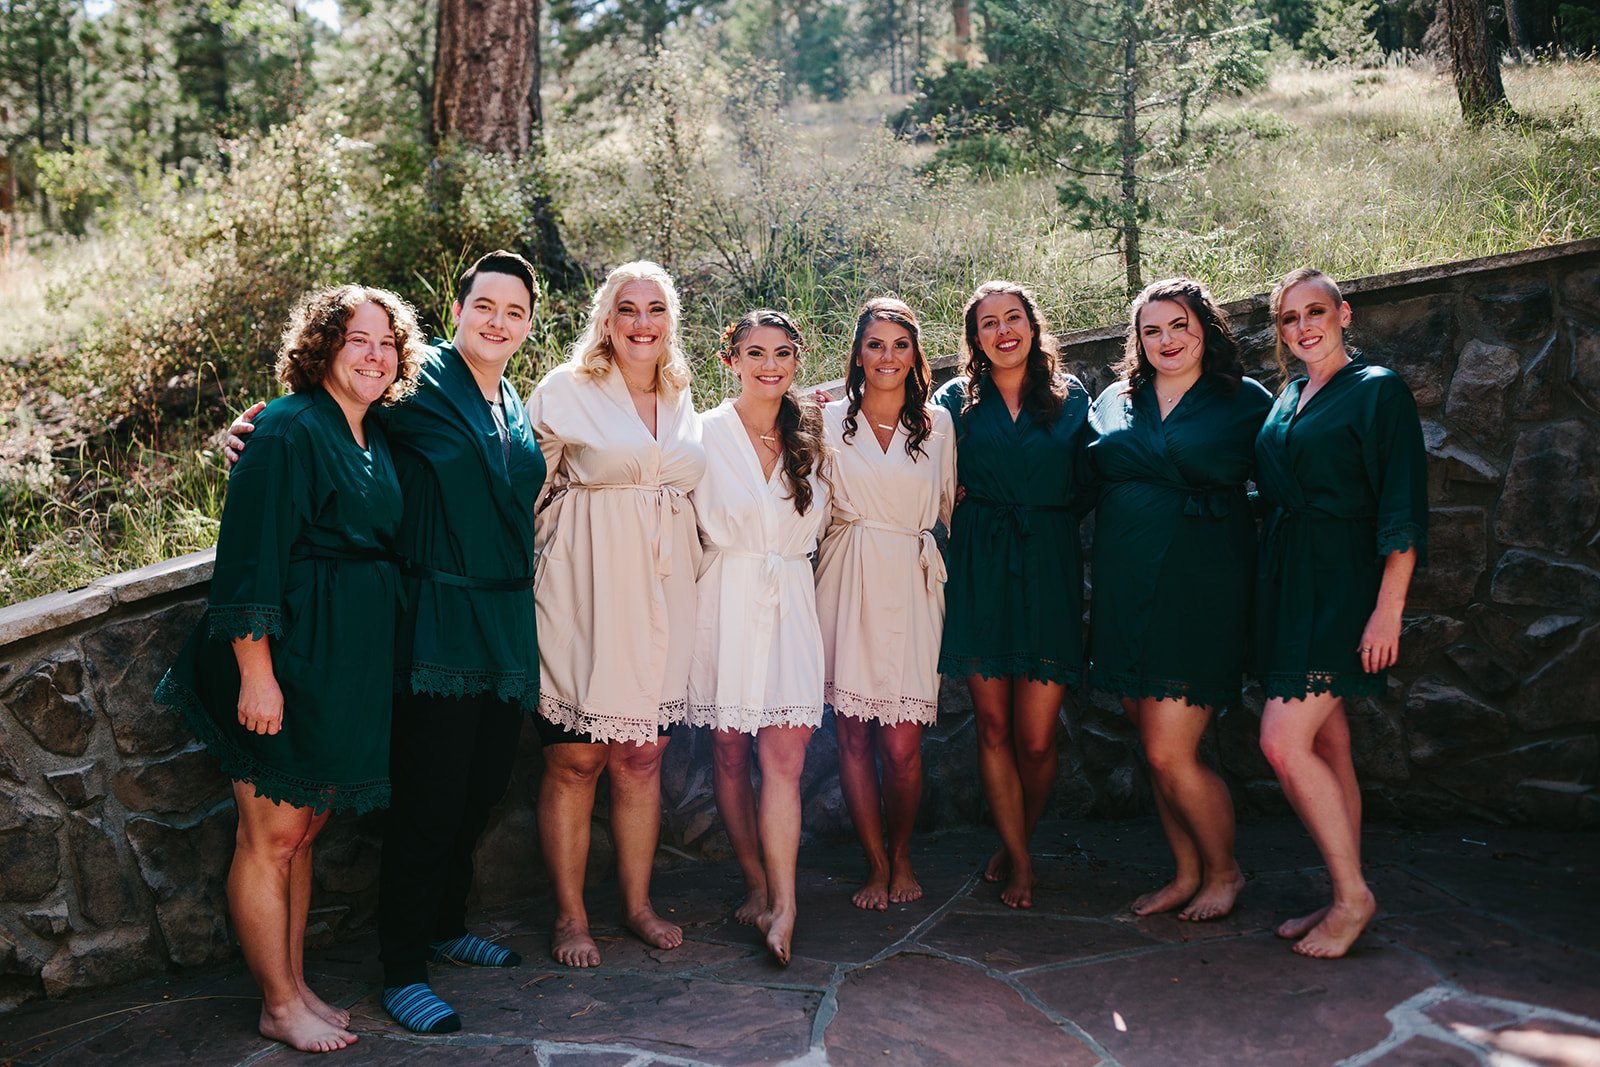  a bridal party wearing matching green and blush wedding robes 